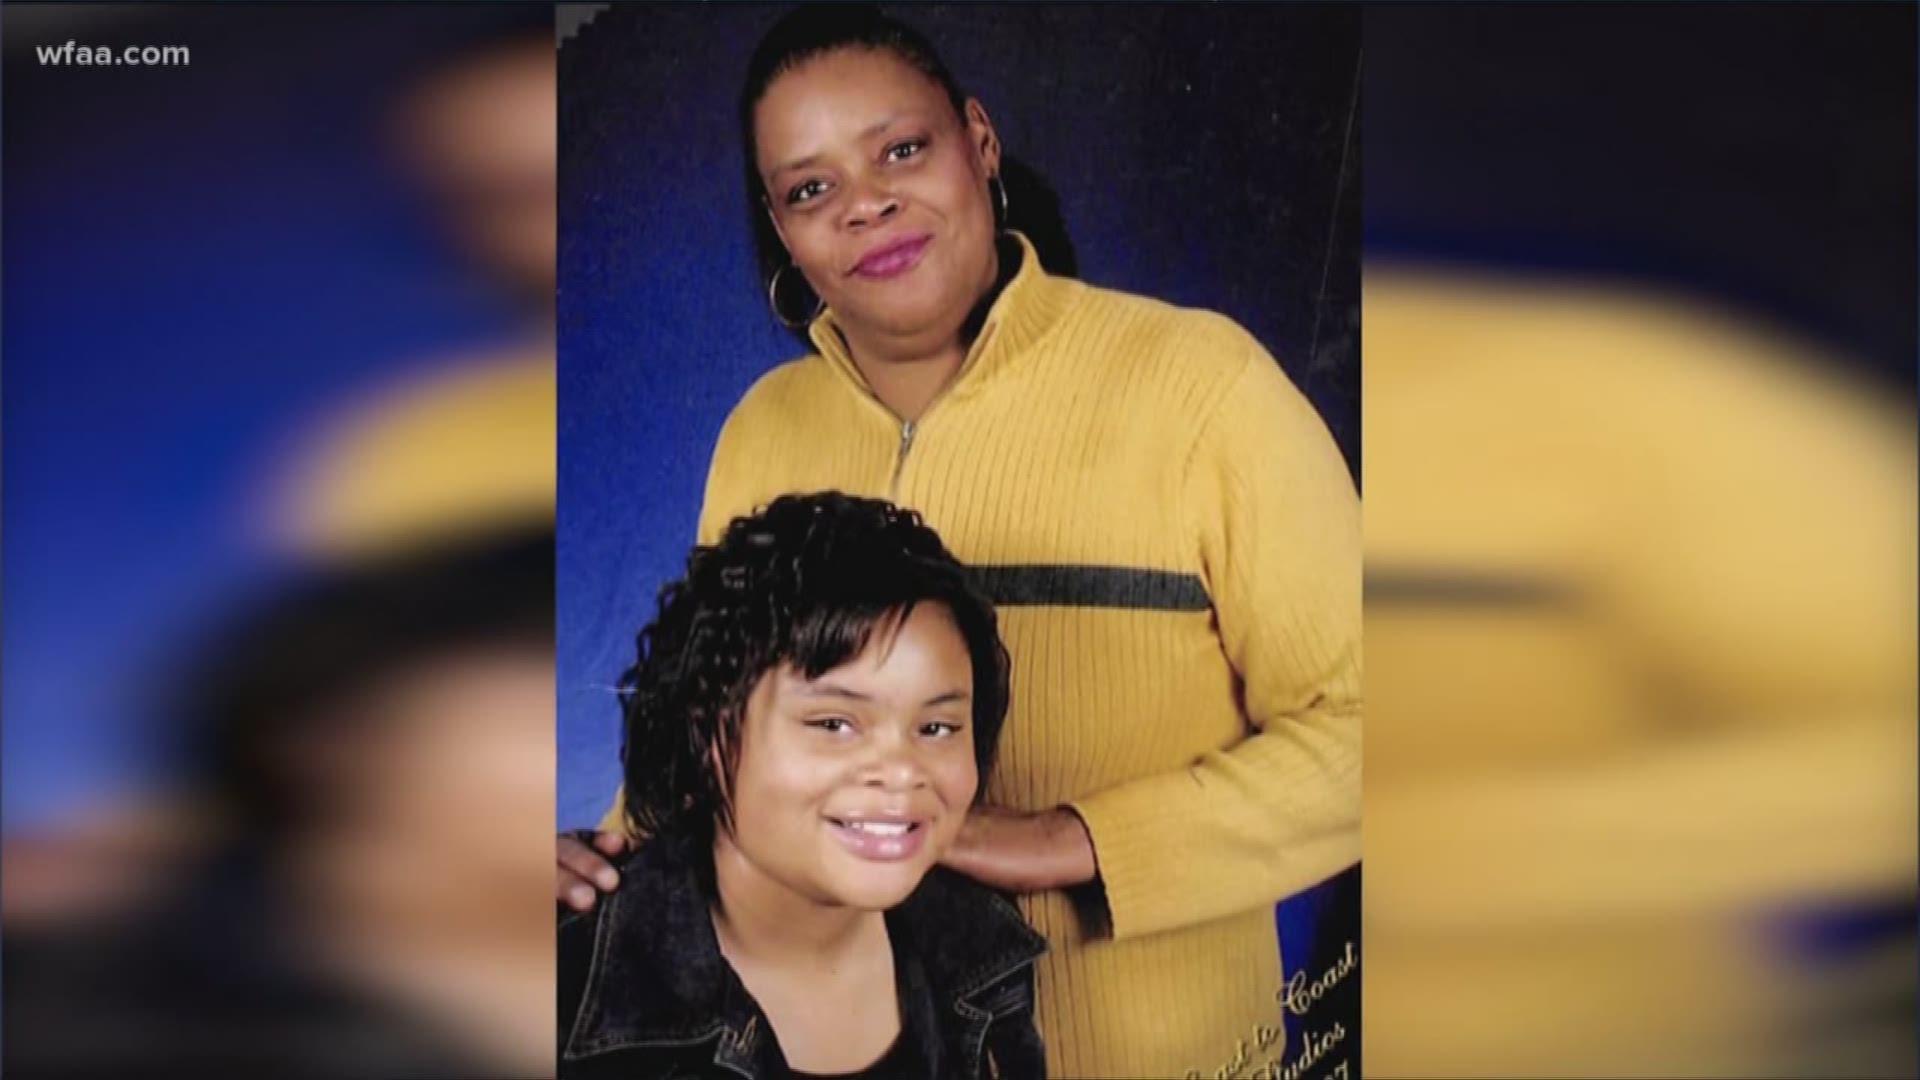 Yolanda Carr, the mother of Atatiana Jefferson, died early Thursday in her home, an attorney for the family said.